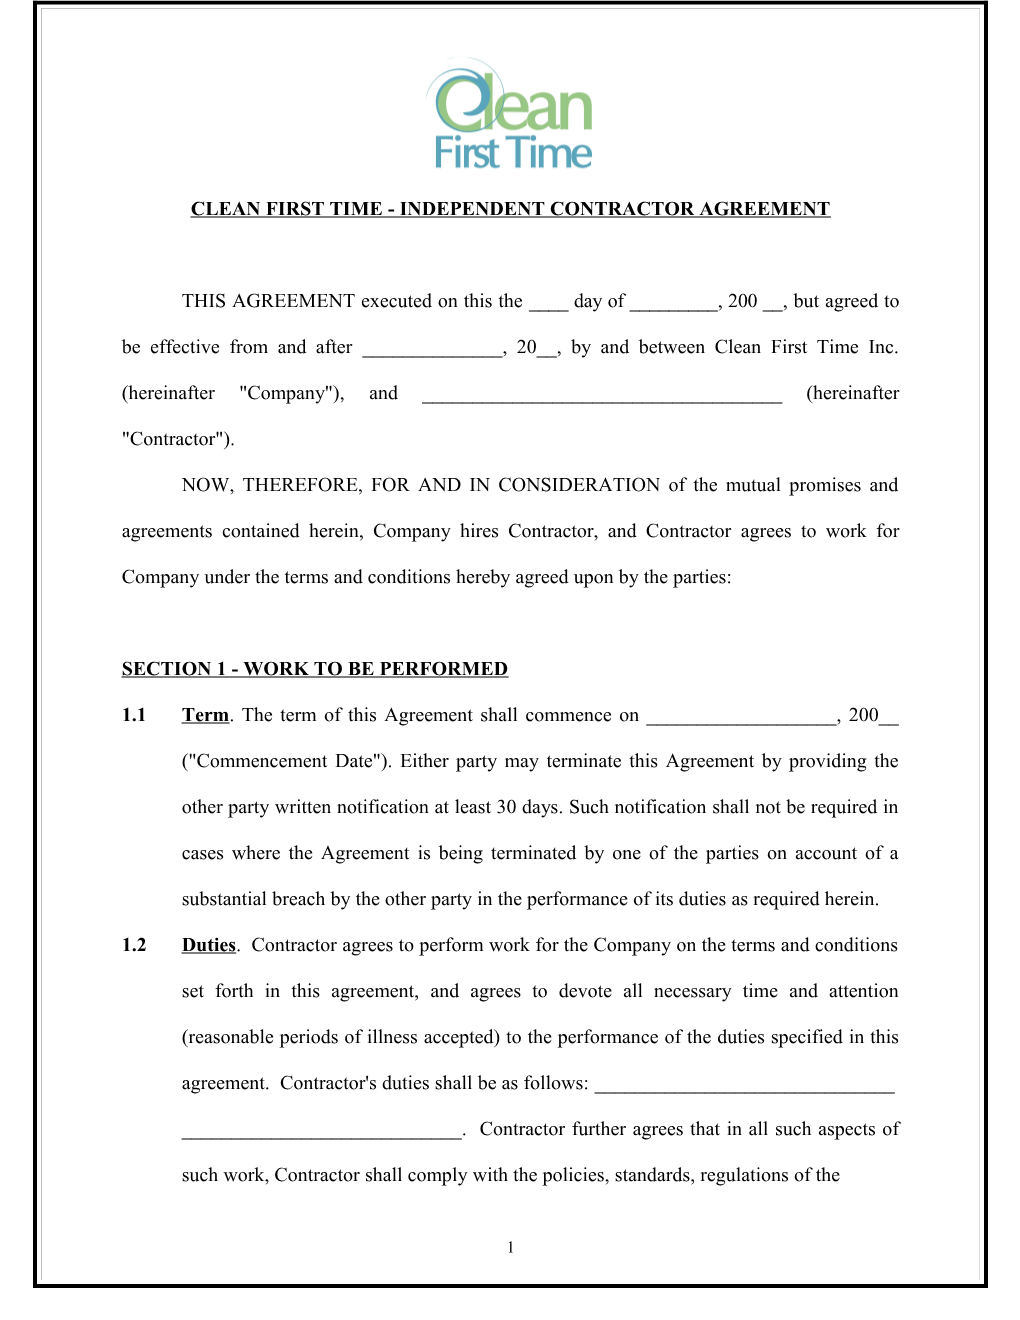 Clean First Time - Independent Contractor Agreement